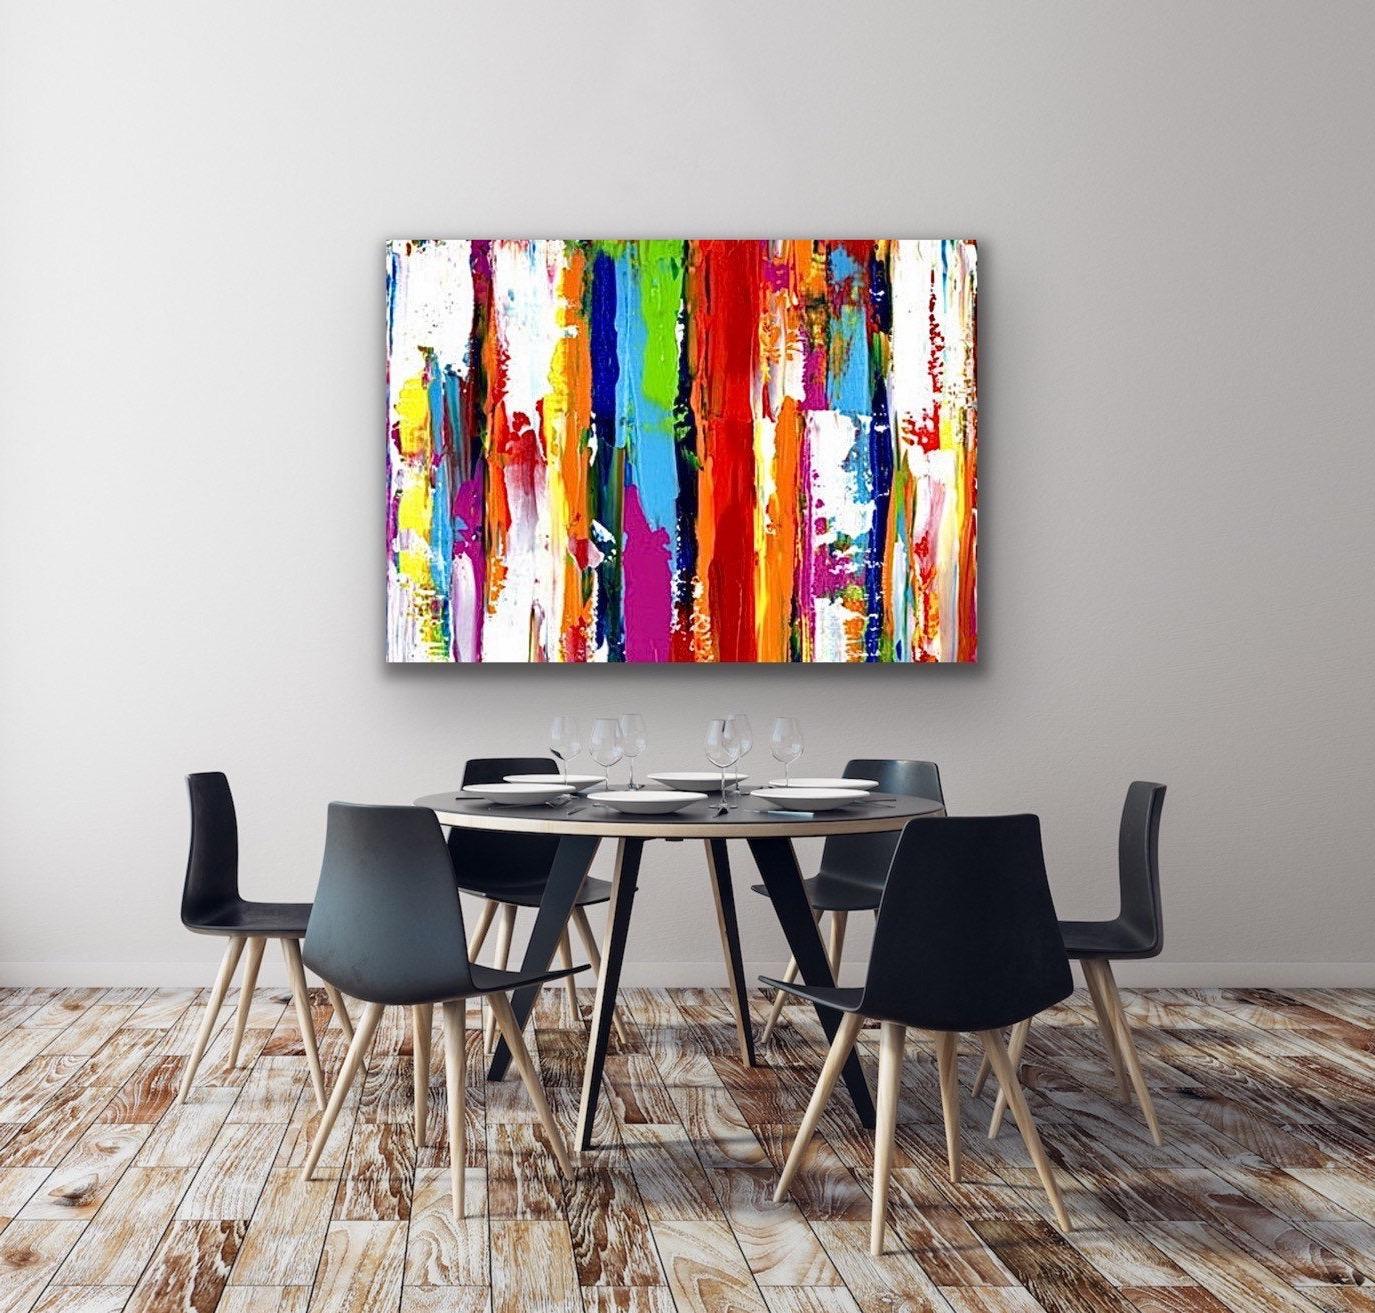 This is a limited edition print of Celeste Reiter's original painting and is signed by the artist.  Printed on lightweight metal composite, your artwork comes ready to hang. This vibrant composition can be hung both indoor and outdoor as it is